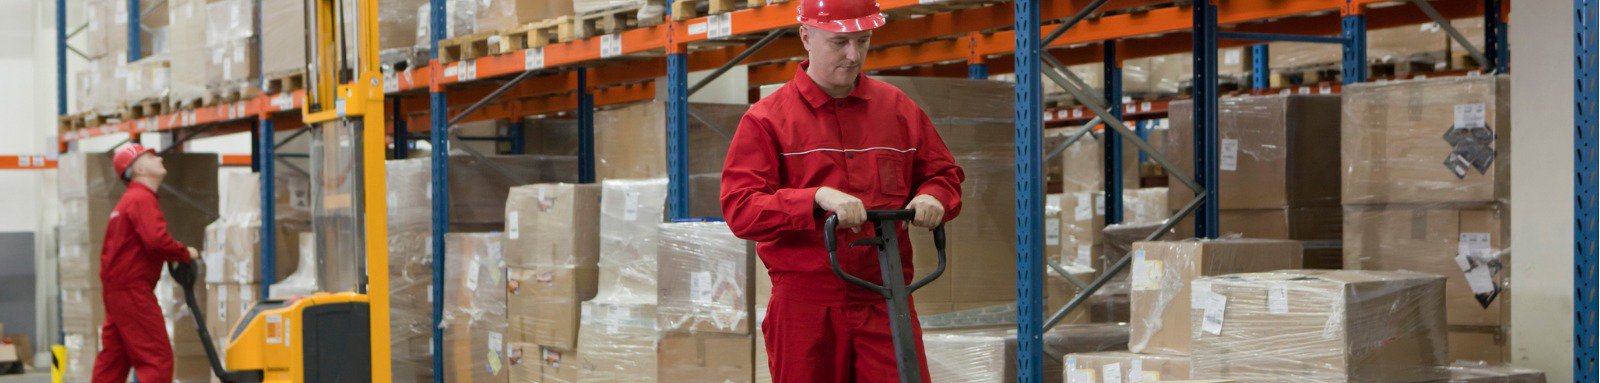 Worker in warehouse lifting boxes with trolley